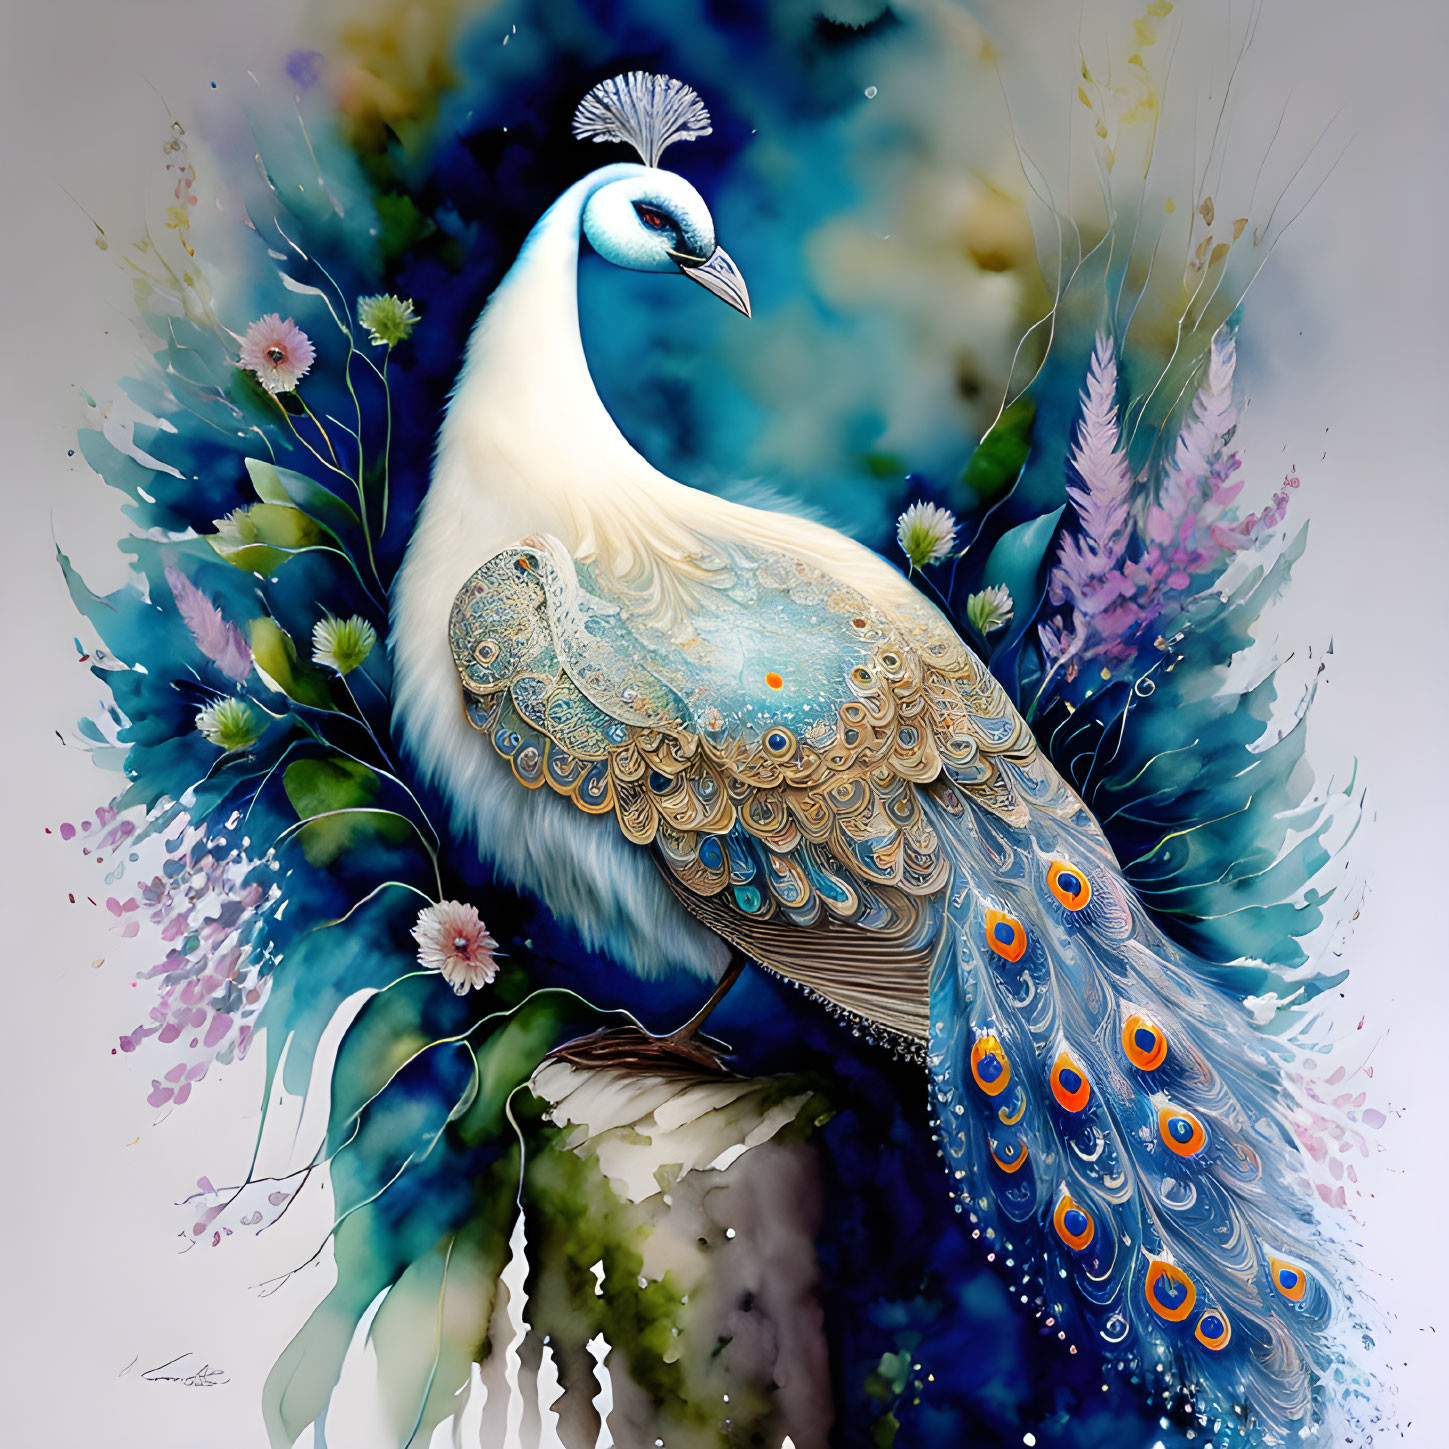 The queen of peacocks